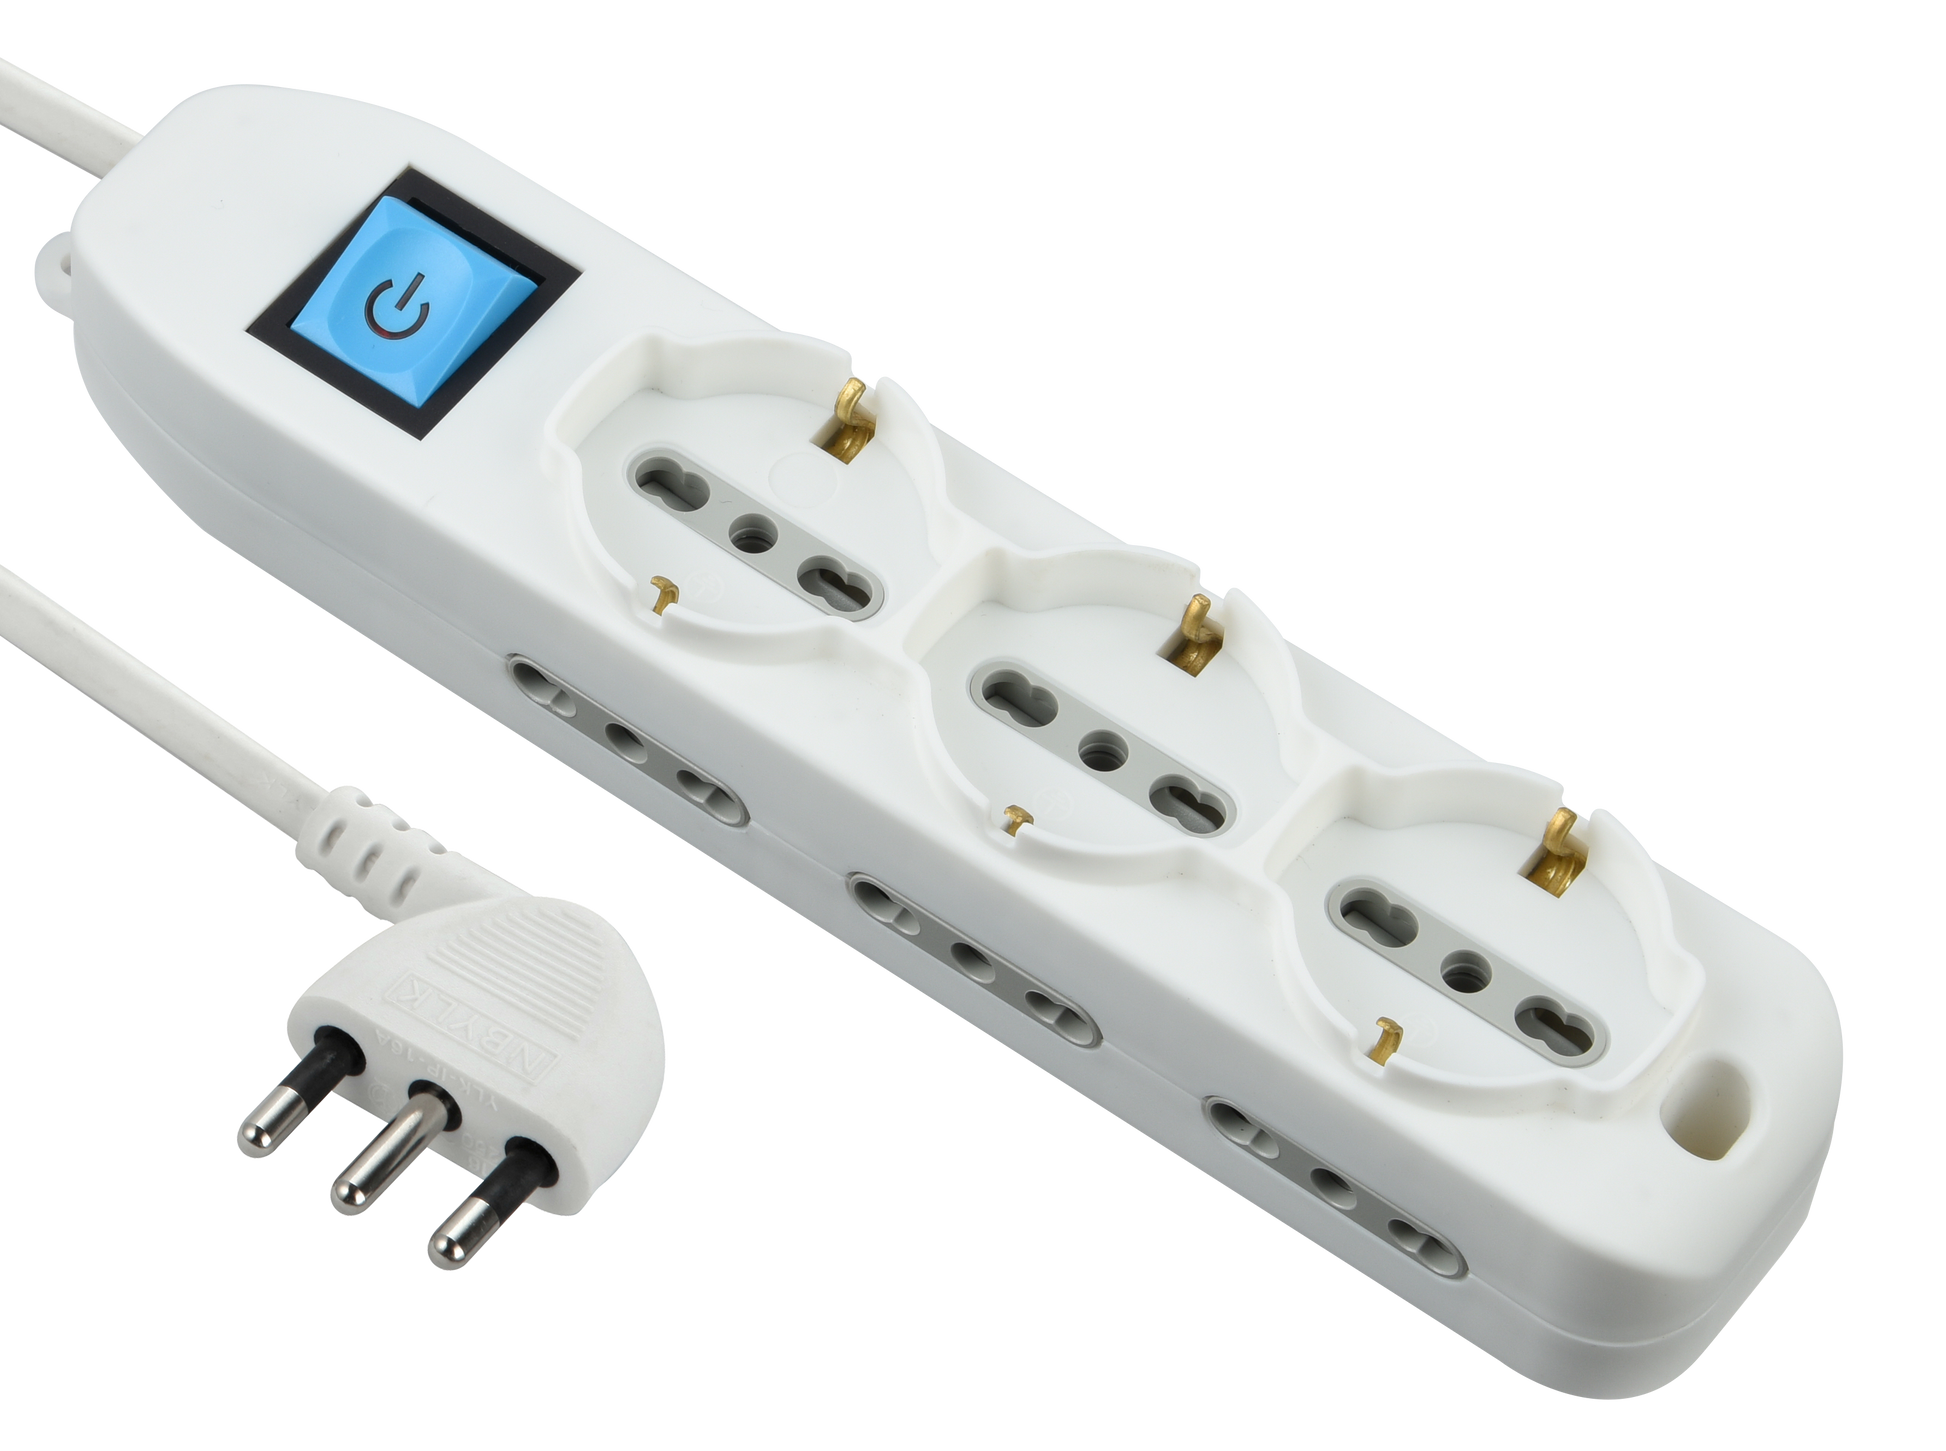 MULTISOCKET 16A PLUG 9 UNIVERSAL SOCKETS CABLE 1.5MT WITH SWITCH IP44 WHITE - best price from Maltashopper.com BR420110300